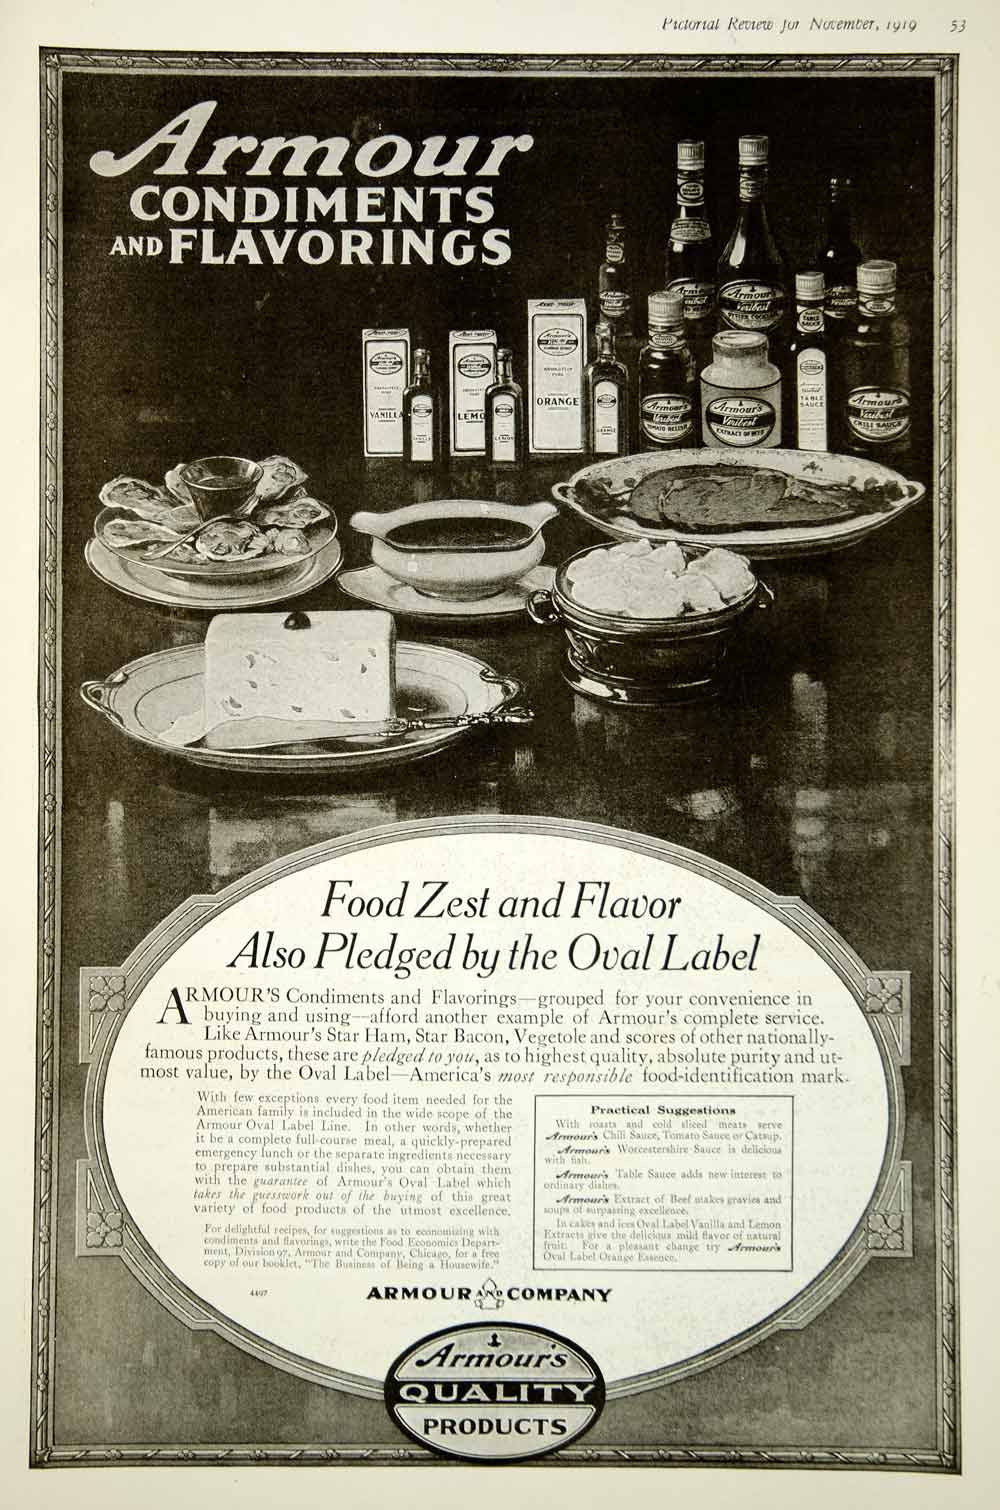 1919 Ad Vintage Armour Condiments Flavorings Chili Table Sauce Catsup Extracts